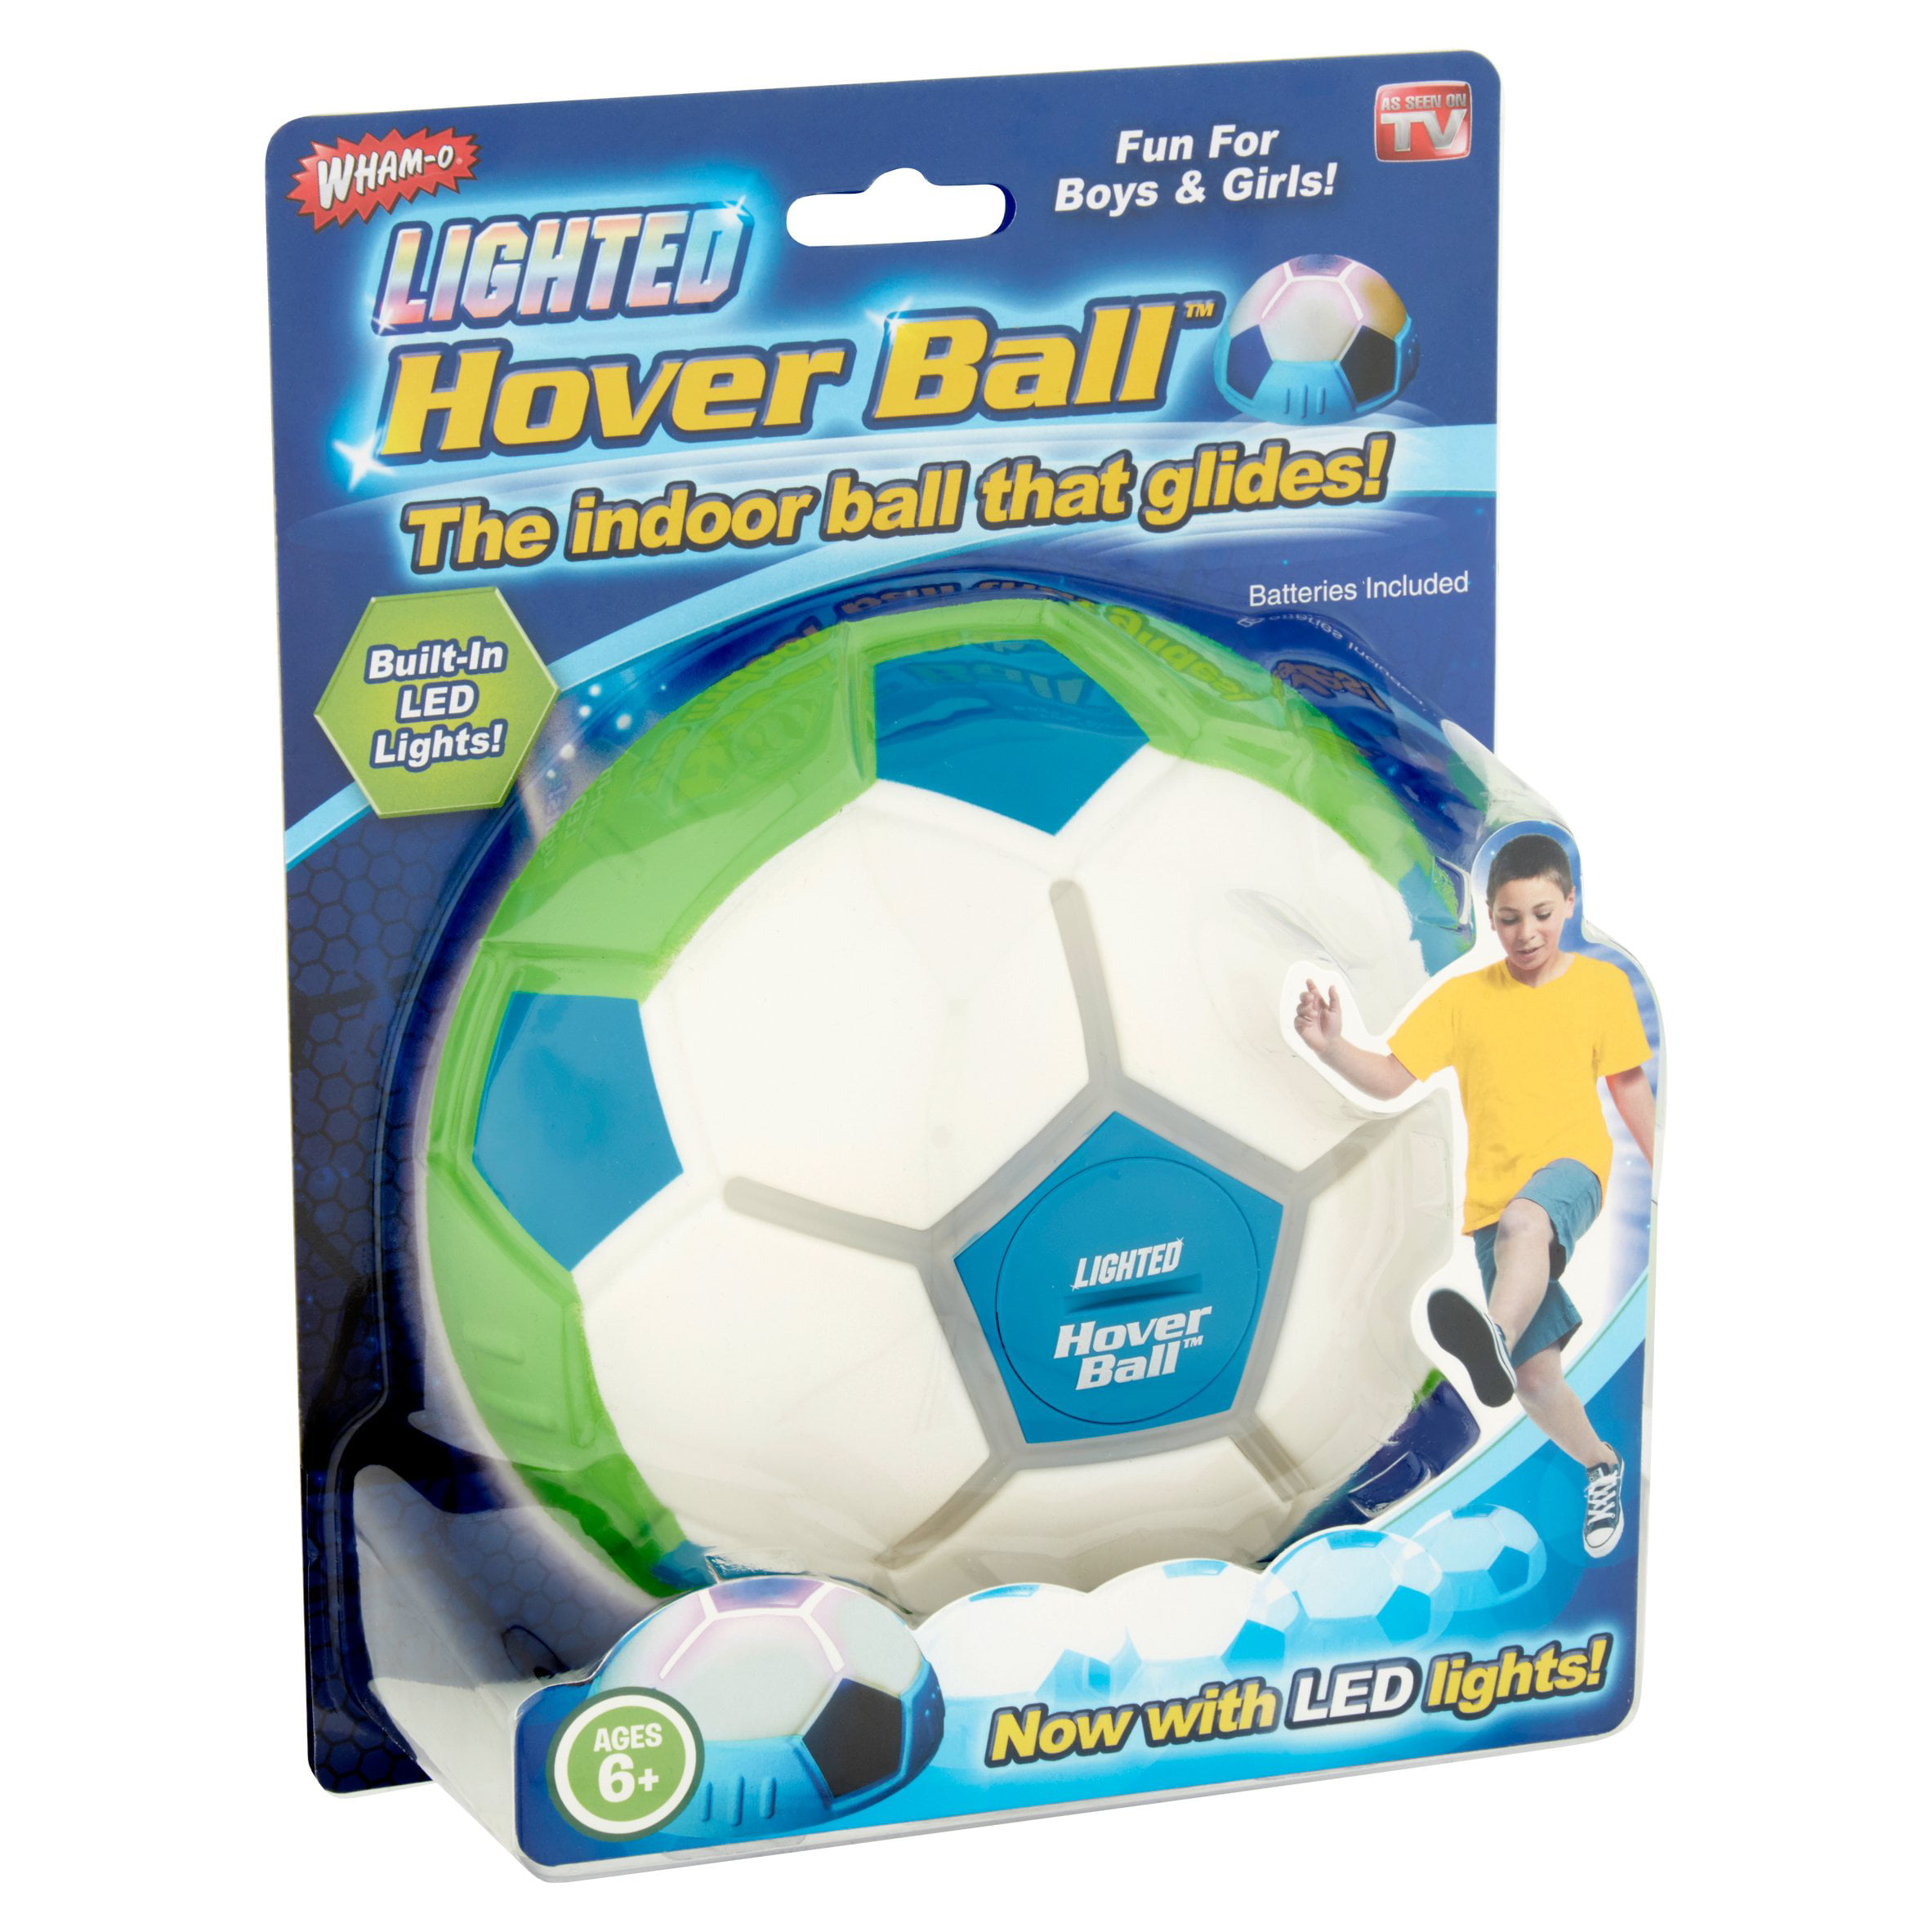 Wham-O Hover Ball Soccer Game Indoor Ball That Glides New Sealed As Seen On  TV